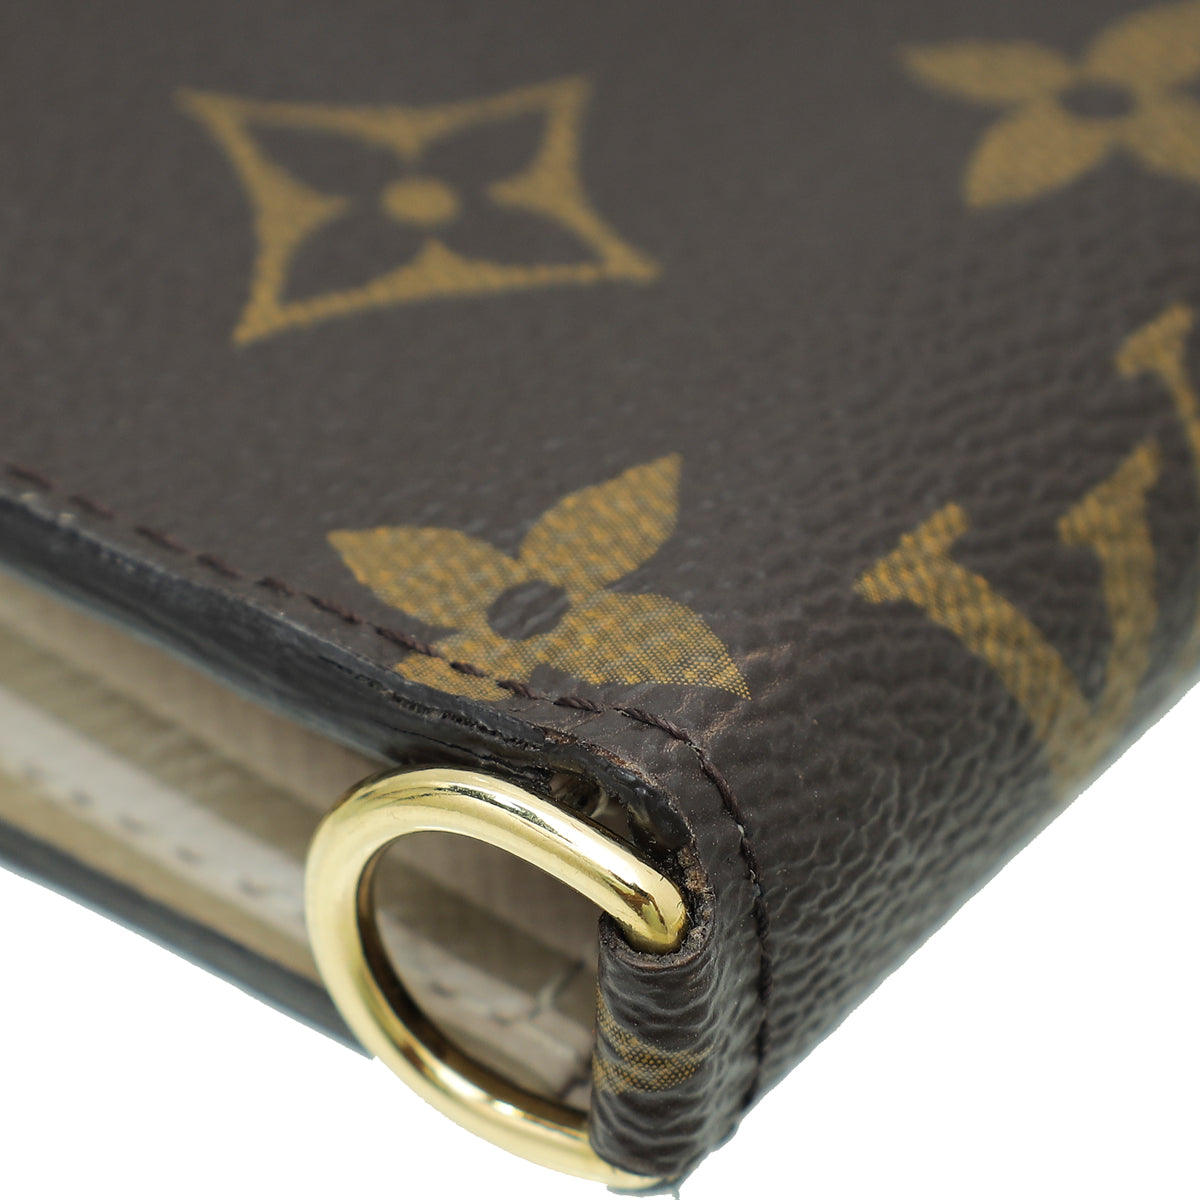 Insolite wallet Louis Vuitton Brown in Other - 31990399